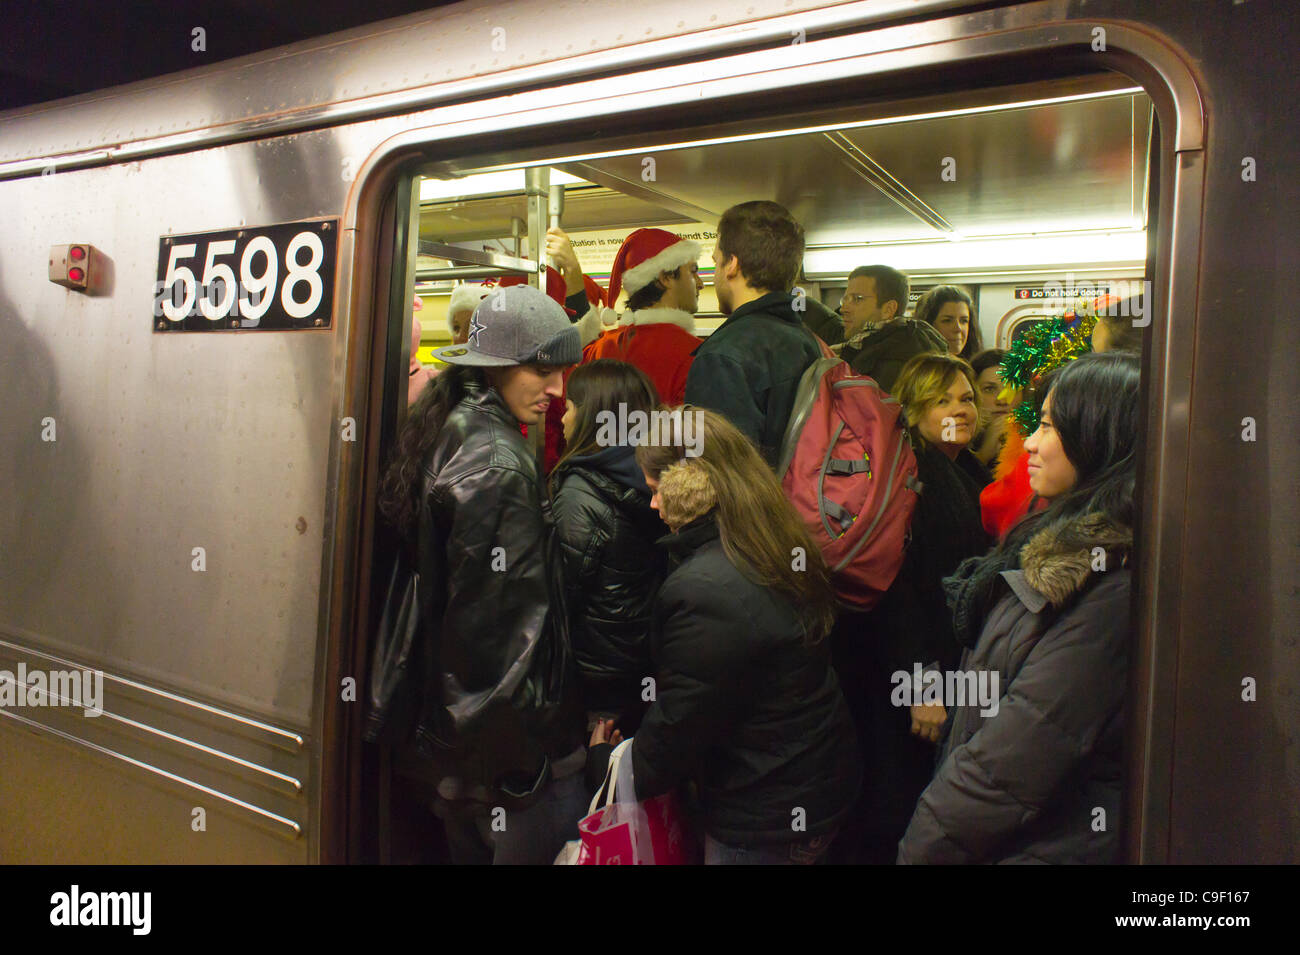 Christmas revelers participating in the annual Santacon travel on the subway in New York on Saturday, December 10, 2011. Santacon, primarily a pub crawl in Santa and other Christmas related costumes, attracts hundreds of masqueraders going from bar to bar. The drinkers were encouraged to imbibe at e Stock Photo